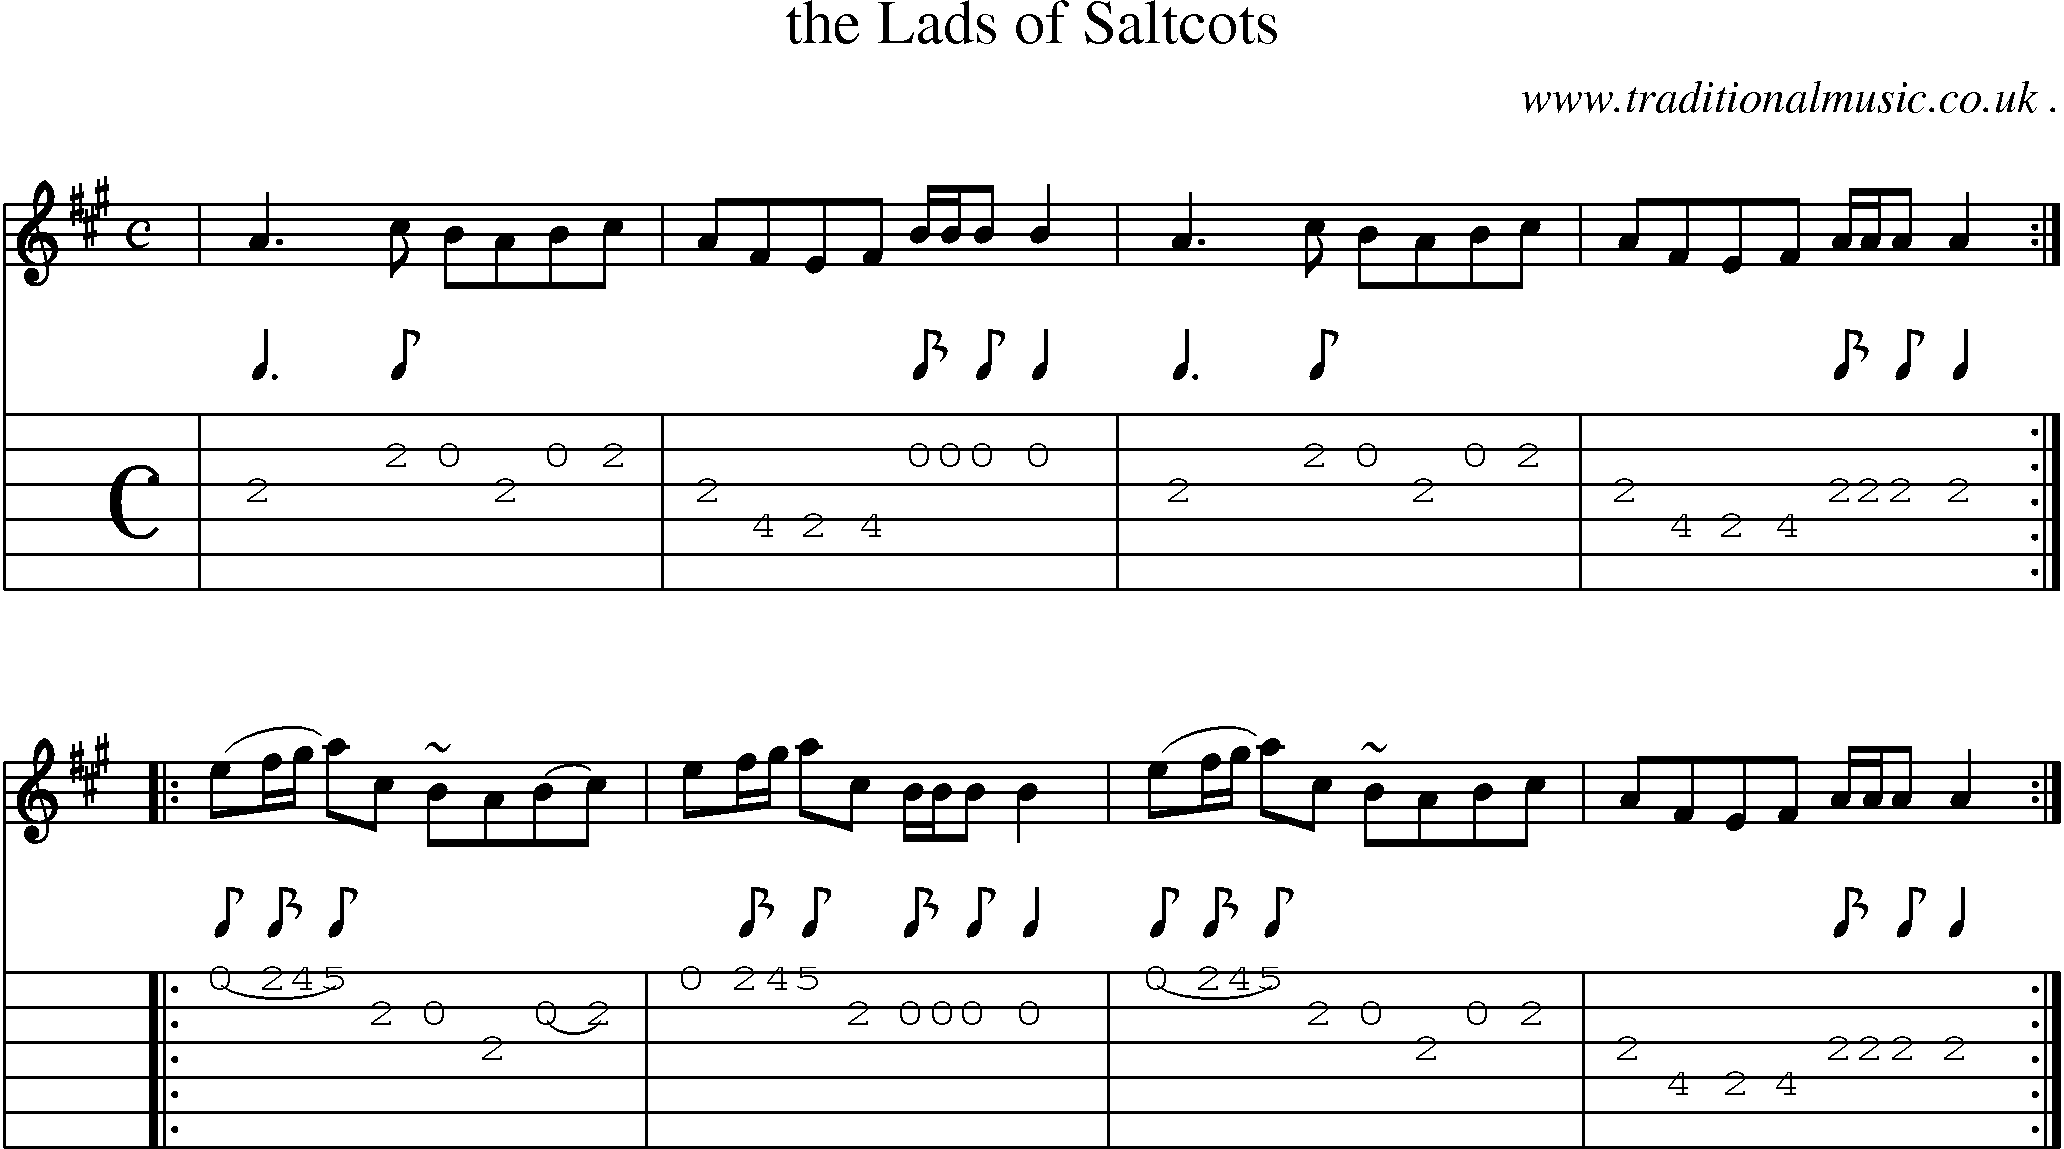 Sheet-music  score, Chords and Guitar Tabs for The Lads Of Saltcots